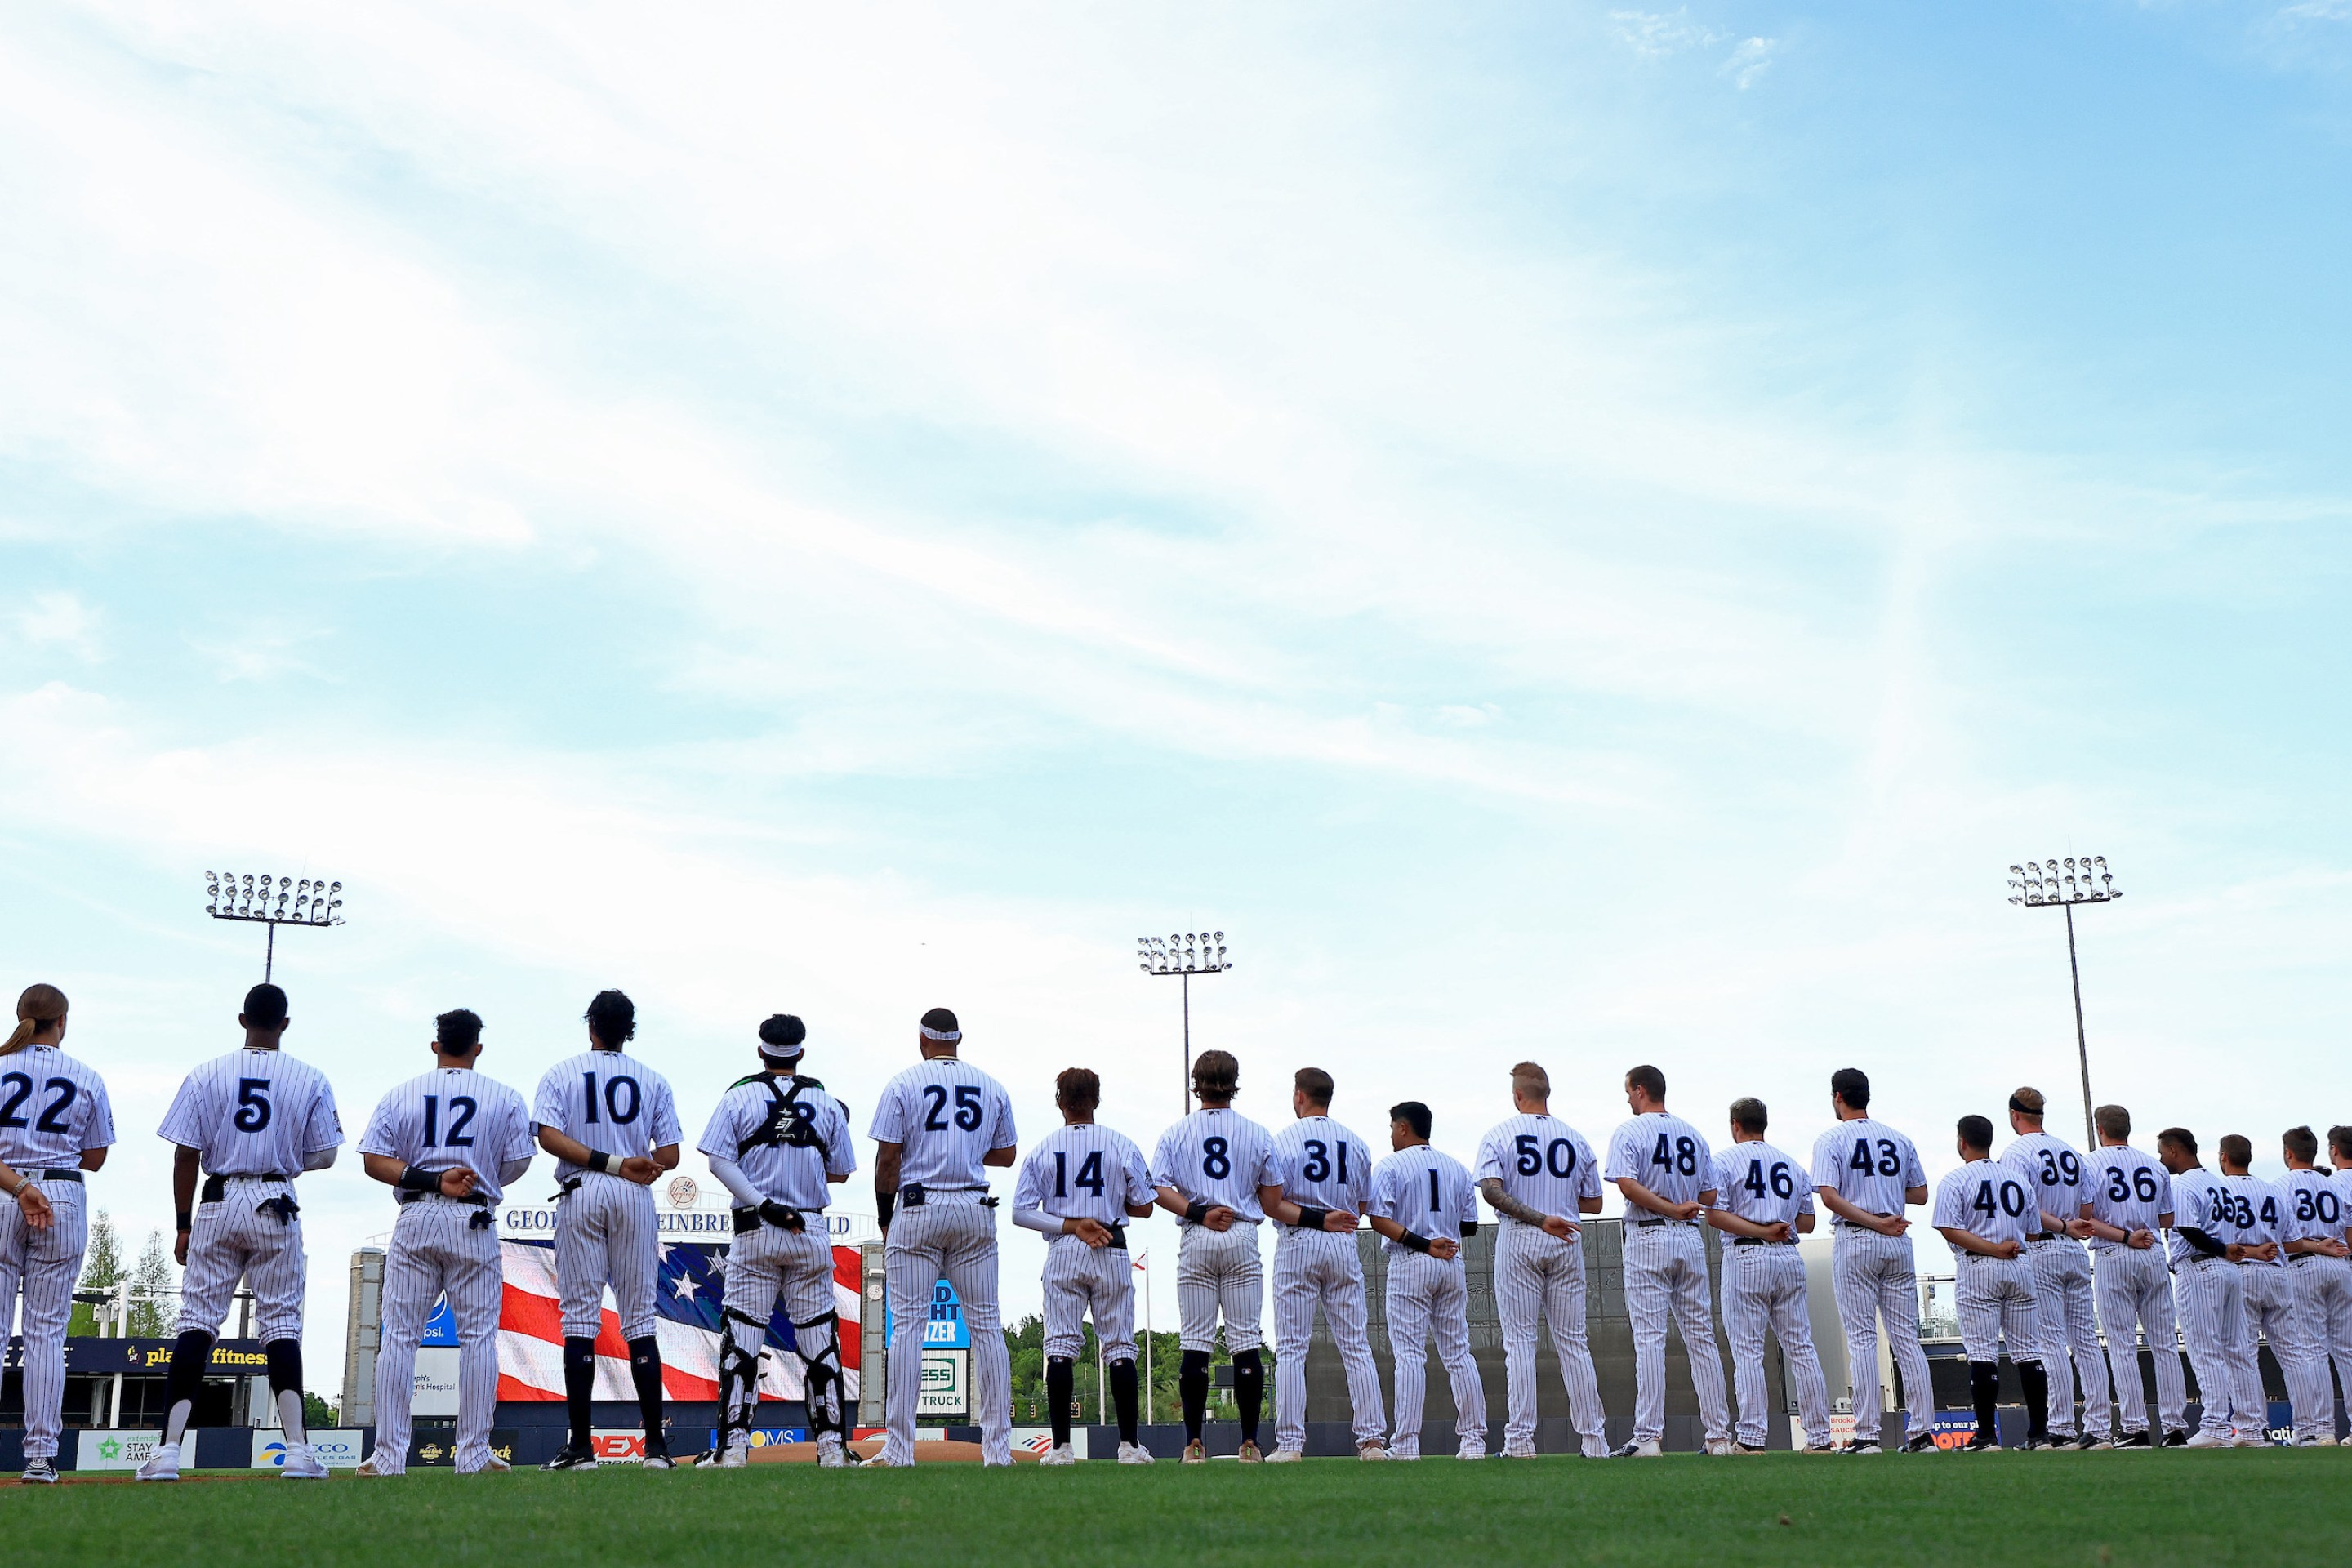 The minor league Tampa Tarpons, under manager Rachel Balkovec, stand for the national anthem in an April 2022 game.